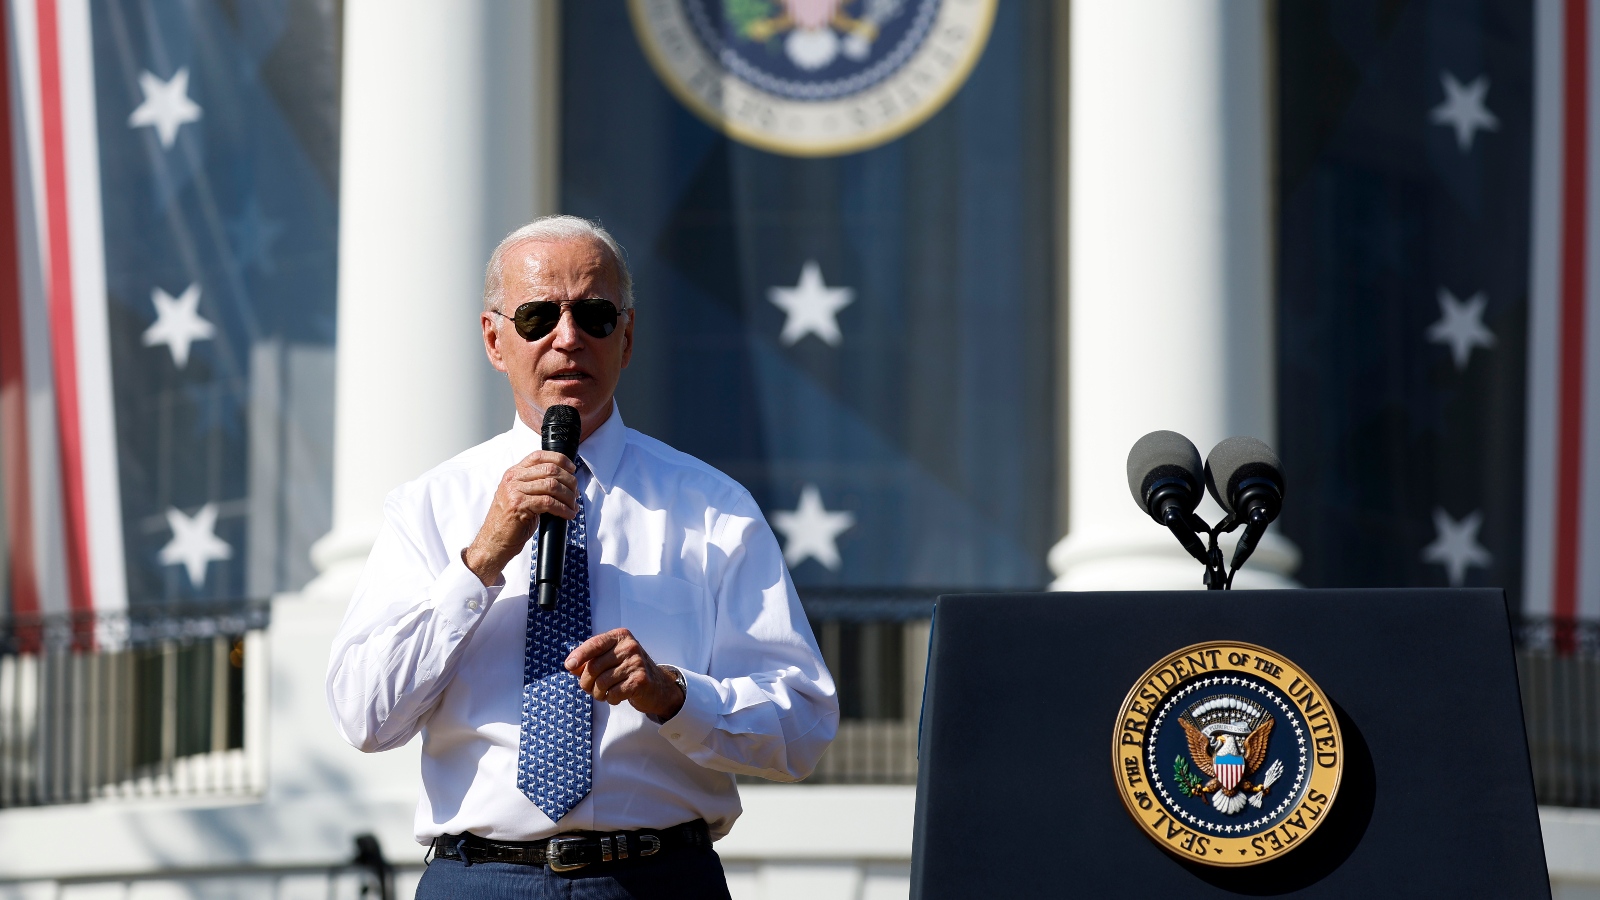 Biden speaks into a microphone against a stars-and-stripes themed backdrop